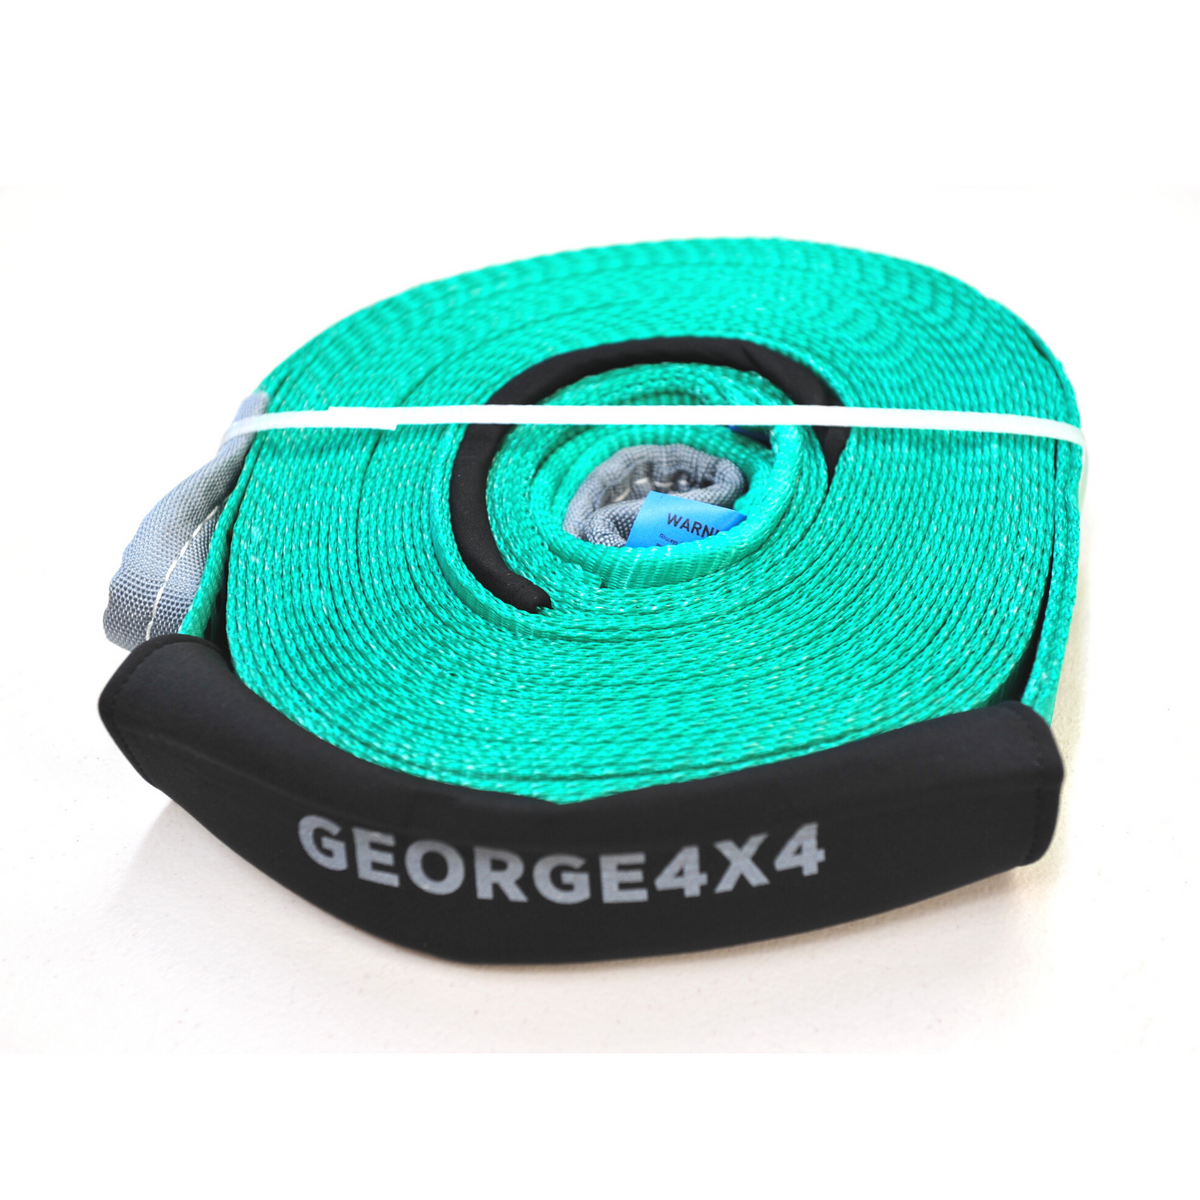 Winch Extension Strap 50mm-5500kg 10m/20m, 4WD Recovery gear 4x4 offro –  George4x4 4WD Recovery Gear